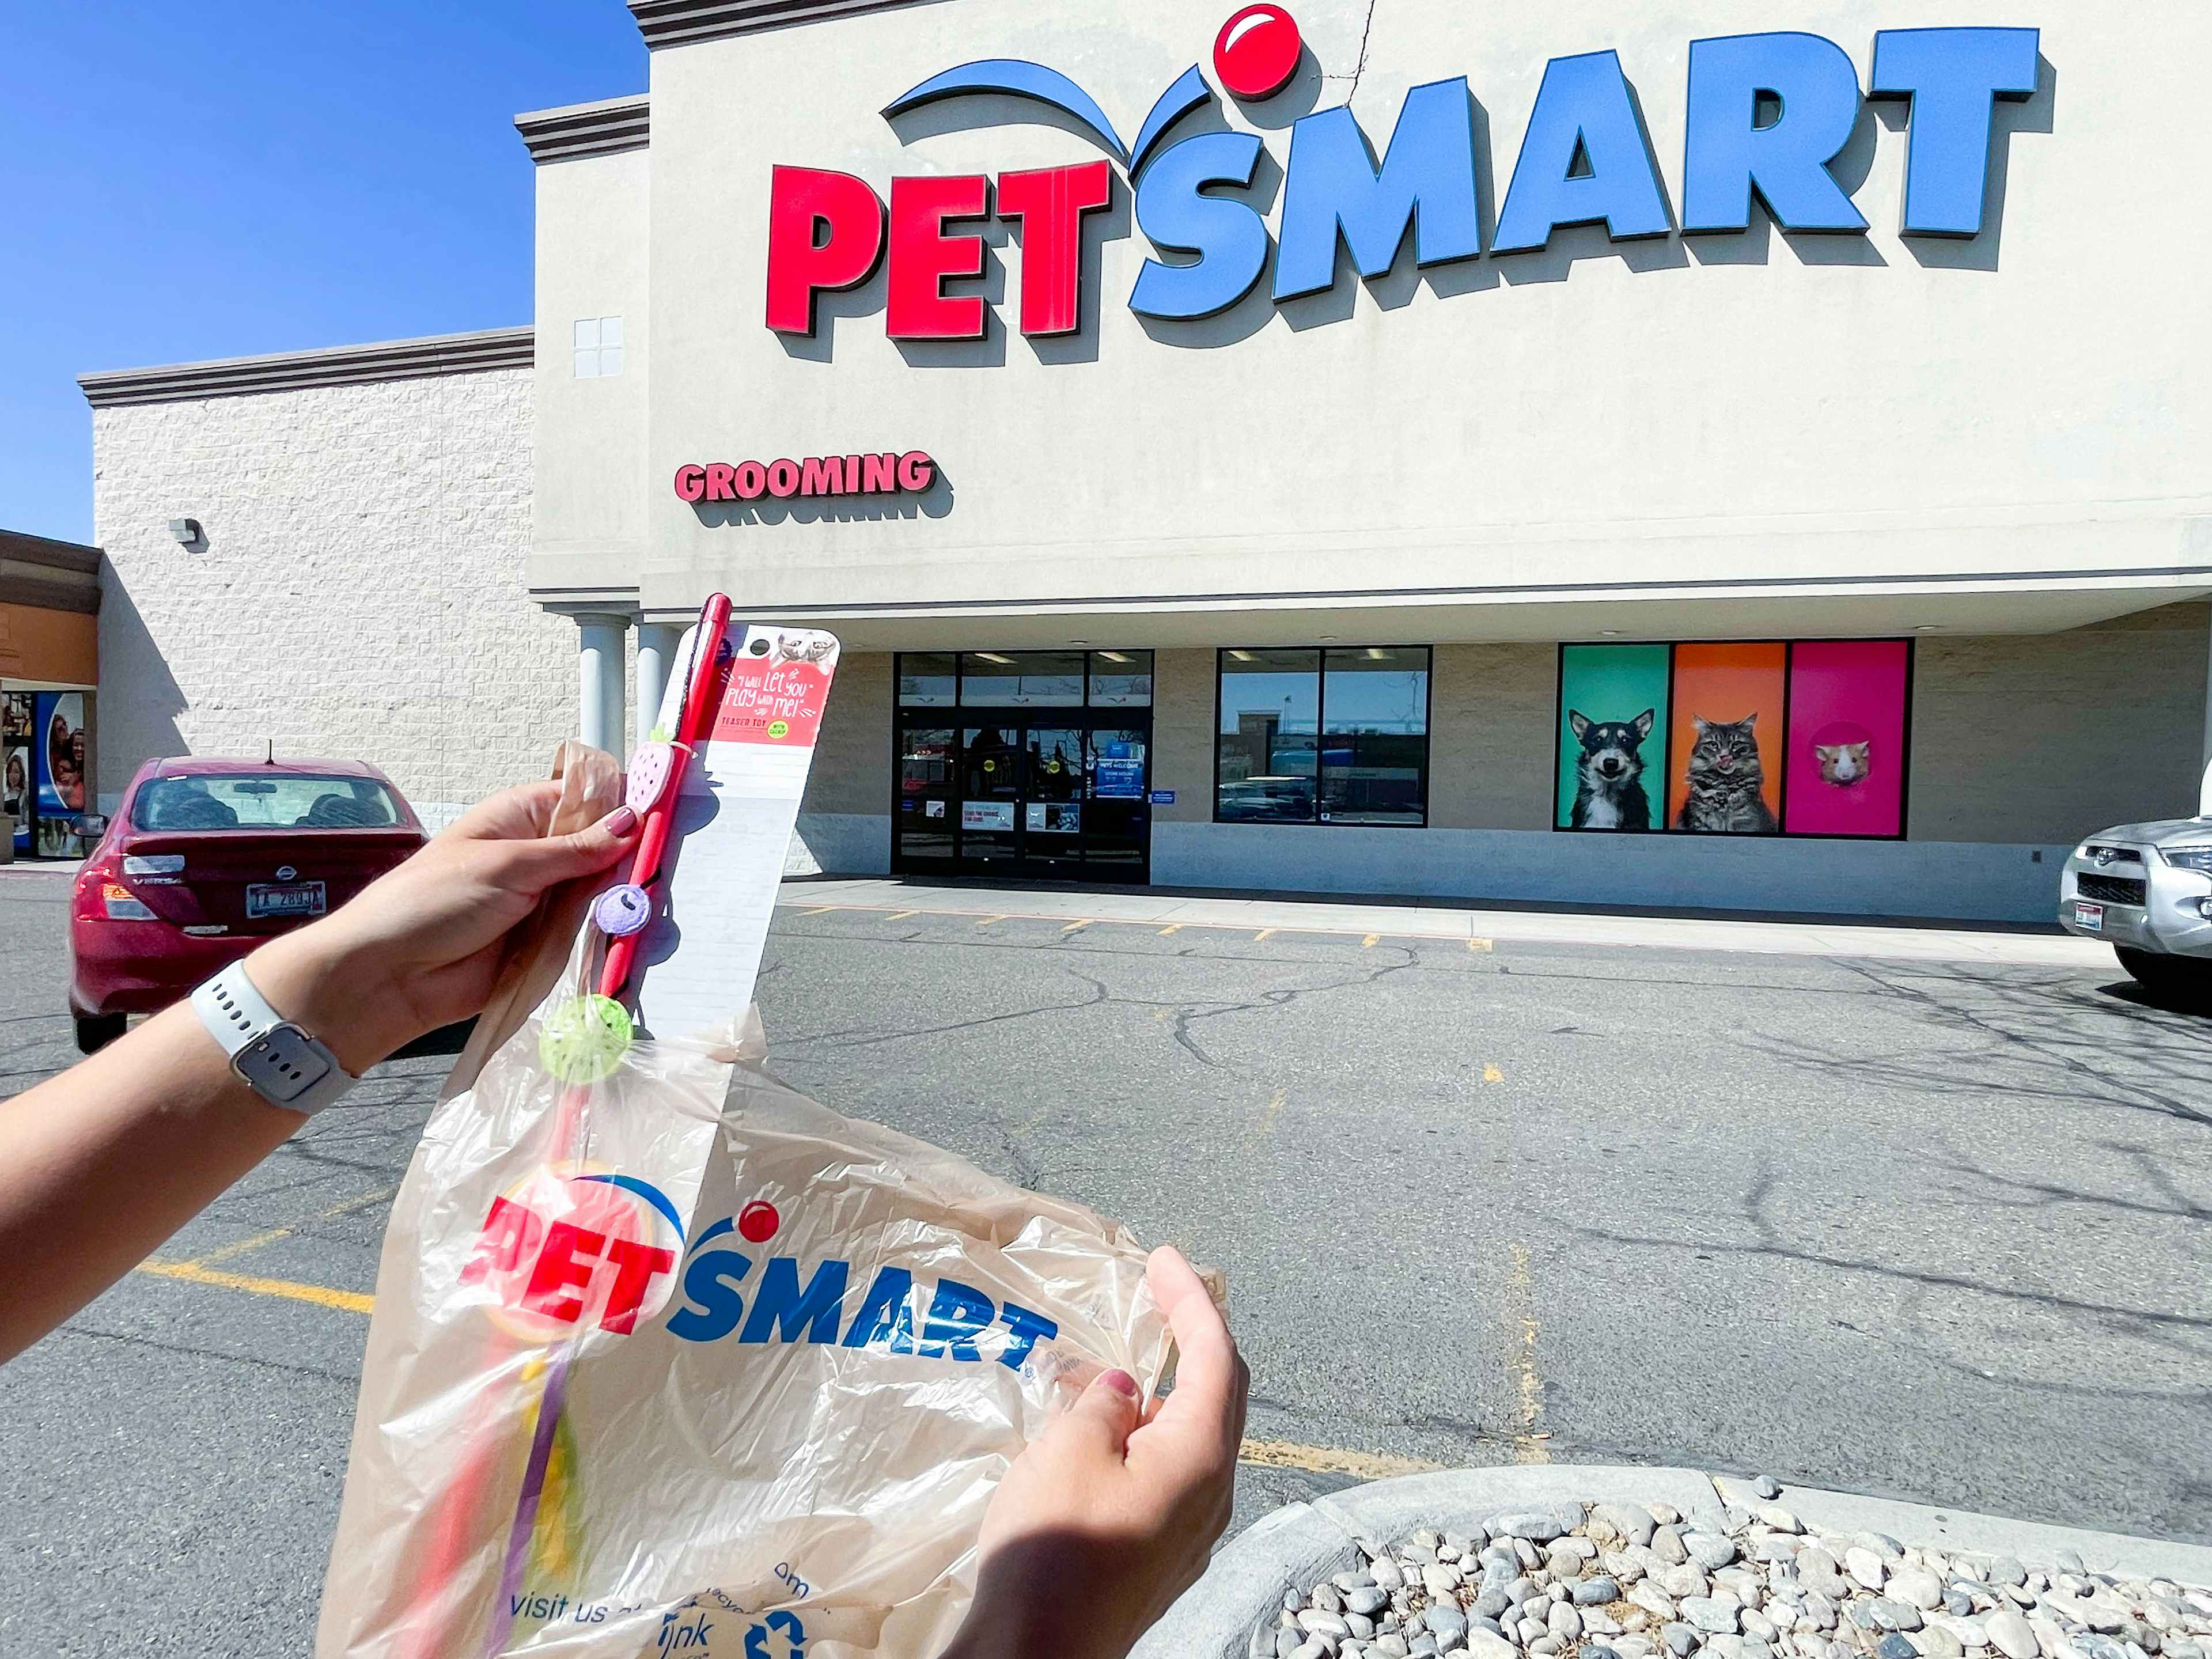 A person's hands holding up a PetSmart bag and pulling a cat toy out of it in the parking lot in front of a PetSmart store.